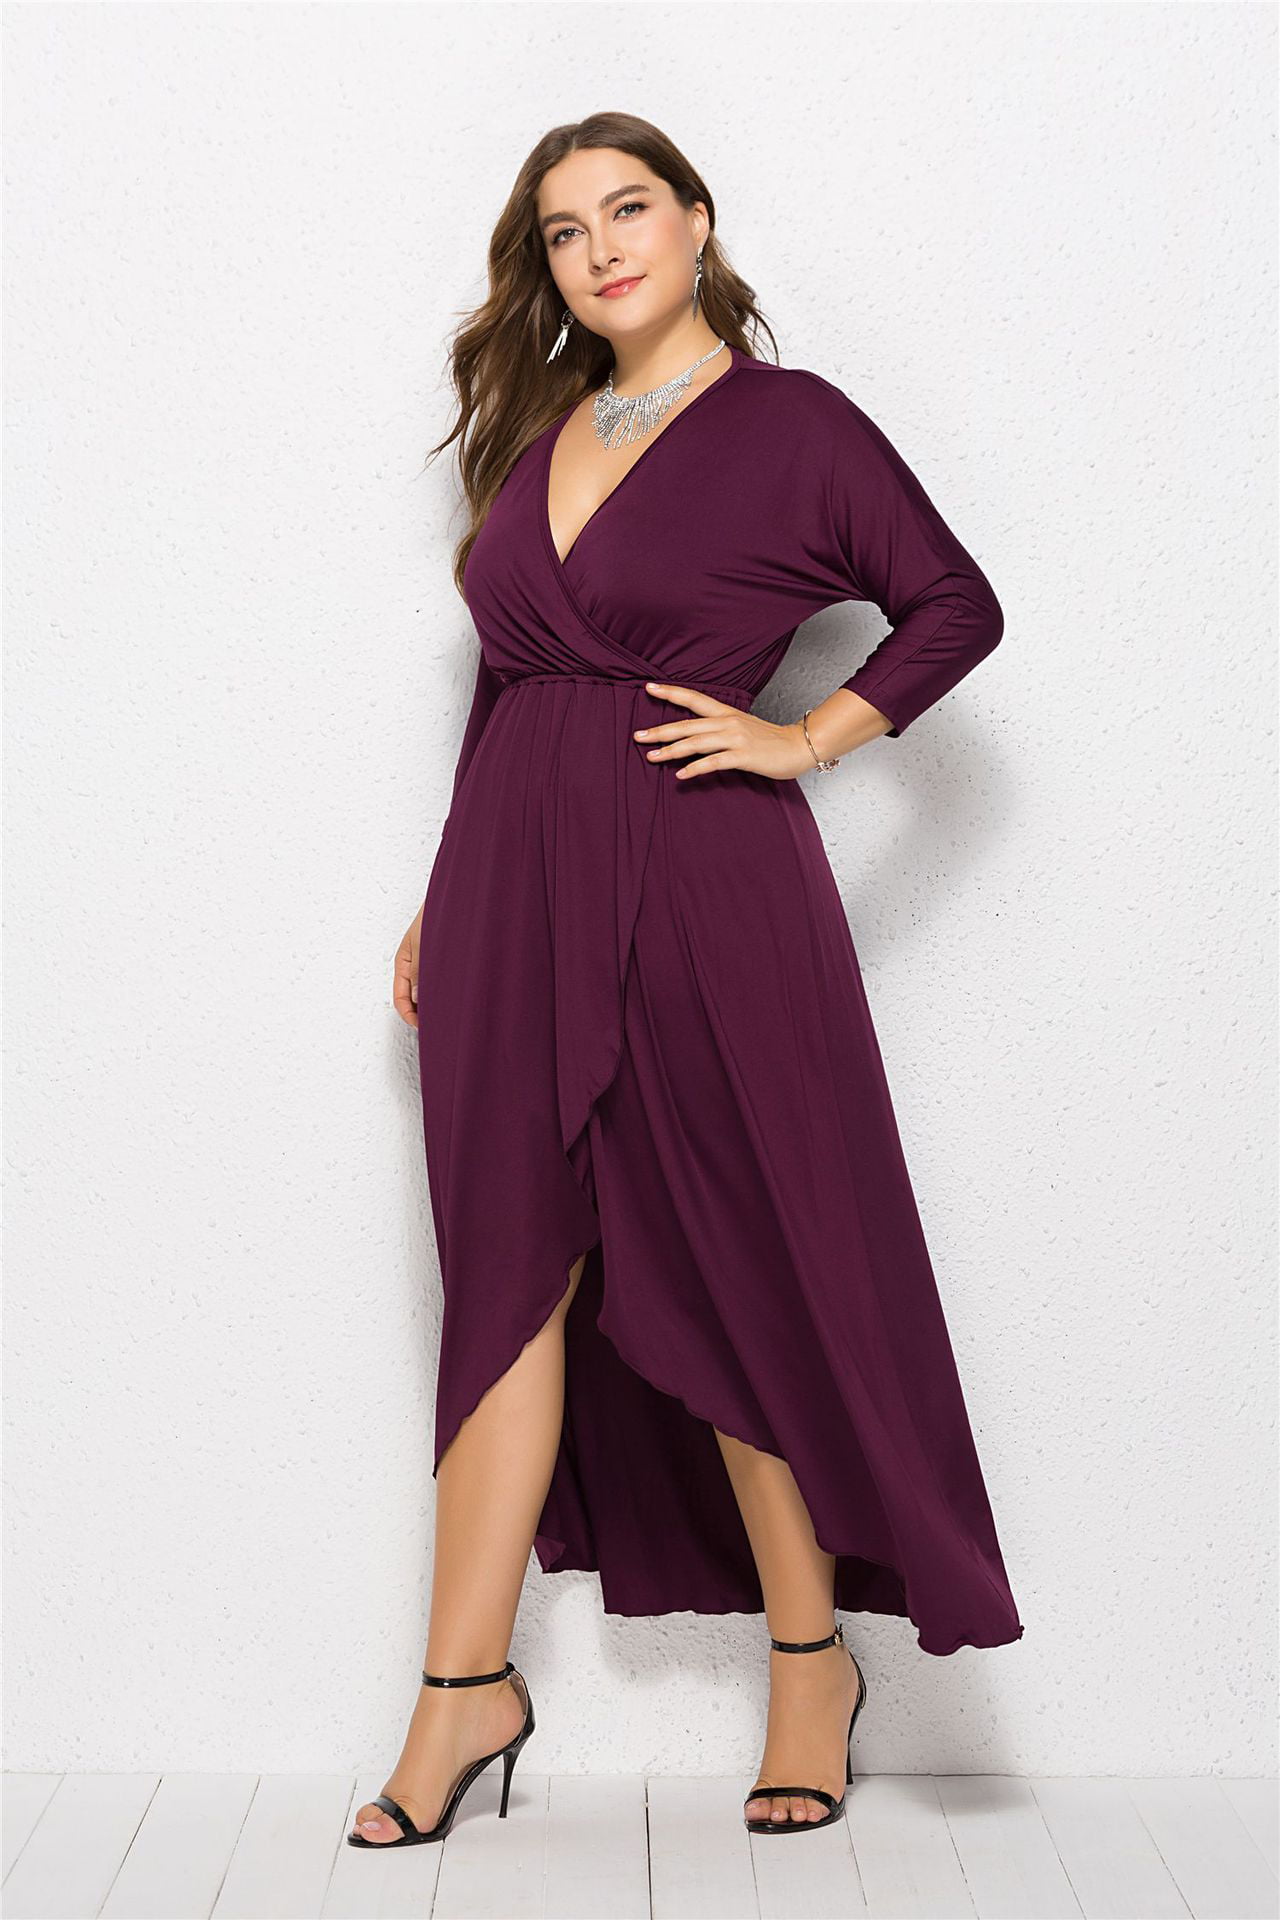 BeautyIn Women Plus Size Dress Long Sleeve V-Neck Loose Pack Hip Tunic  Winter Party Dresses 